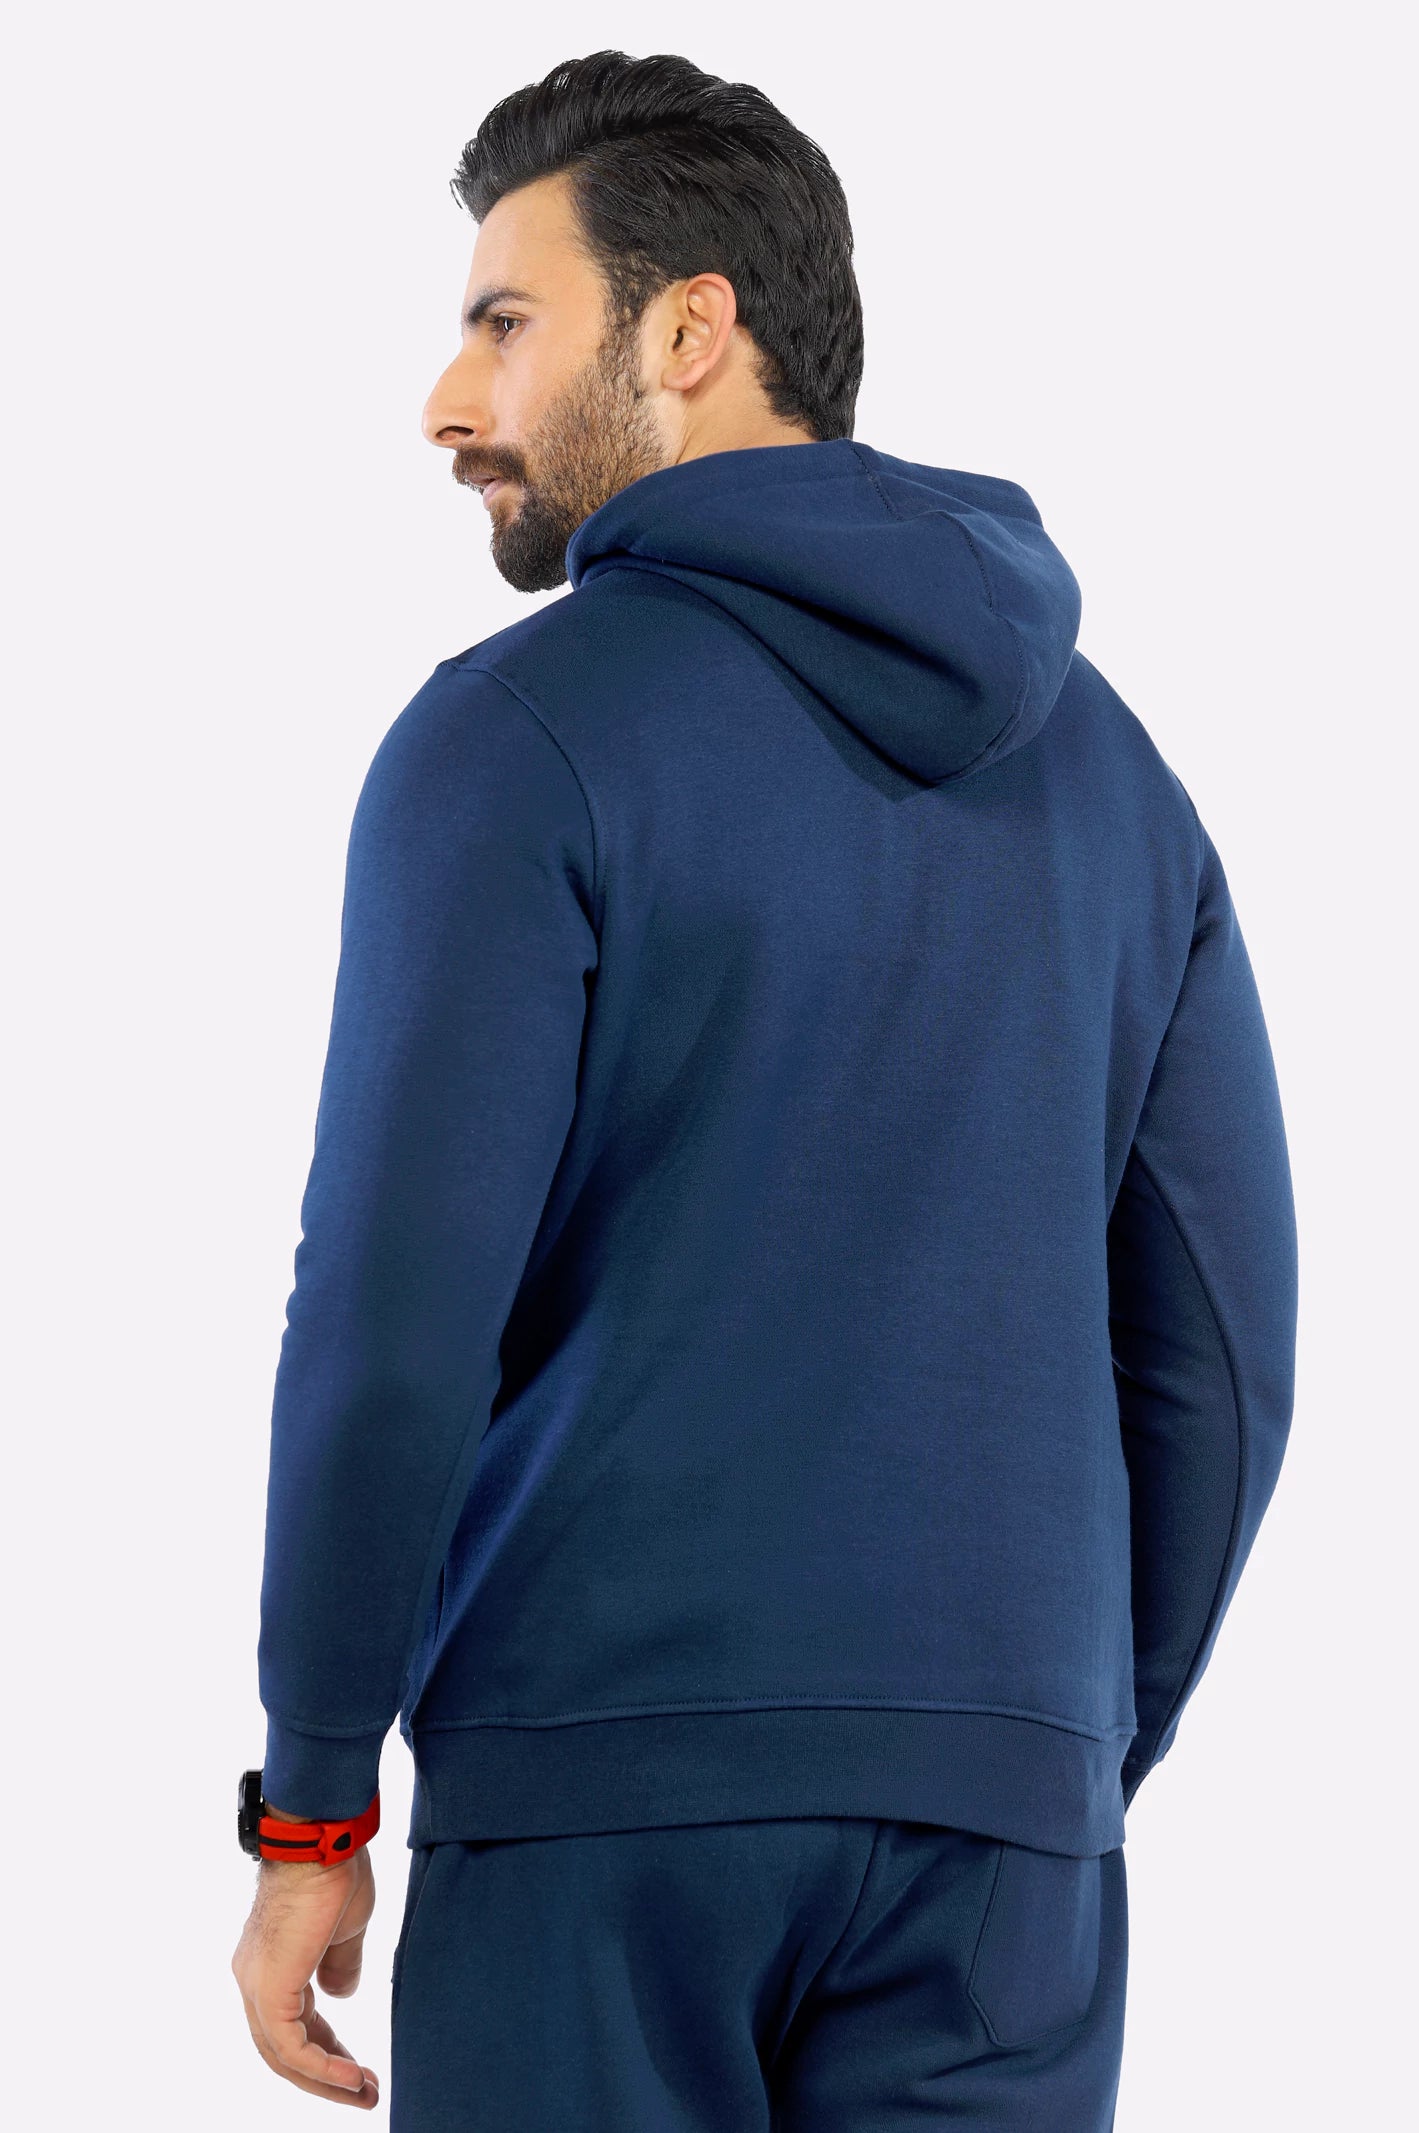 Basic Navy Blue Hoodie from Diners